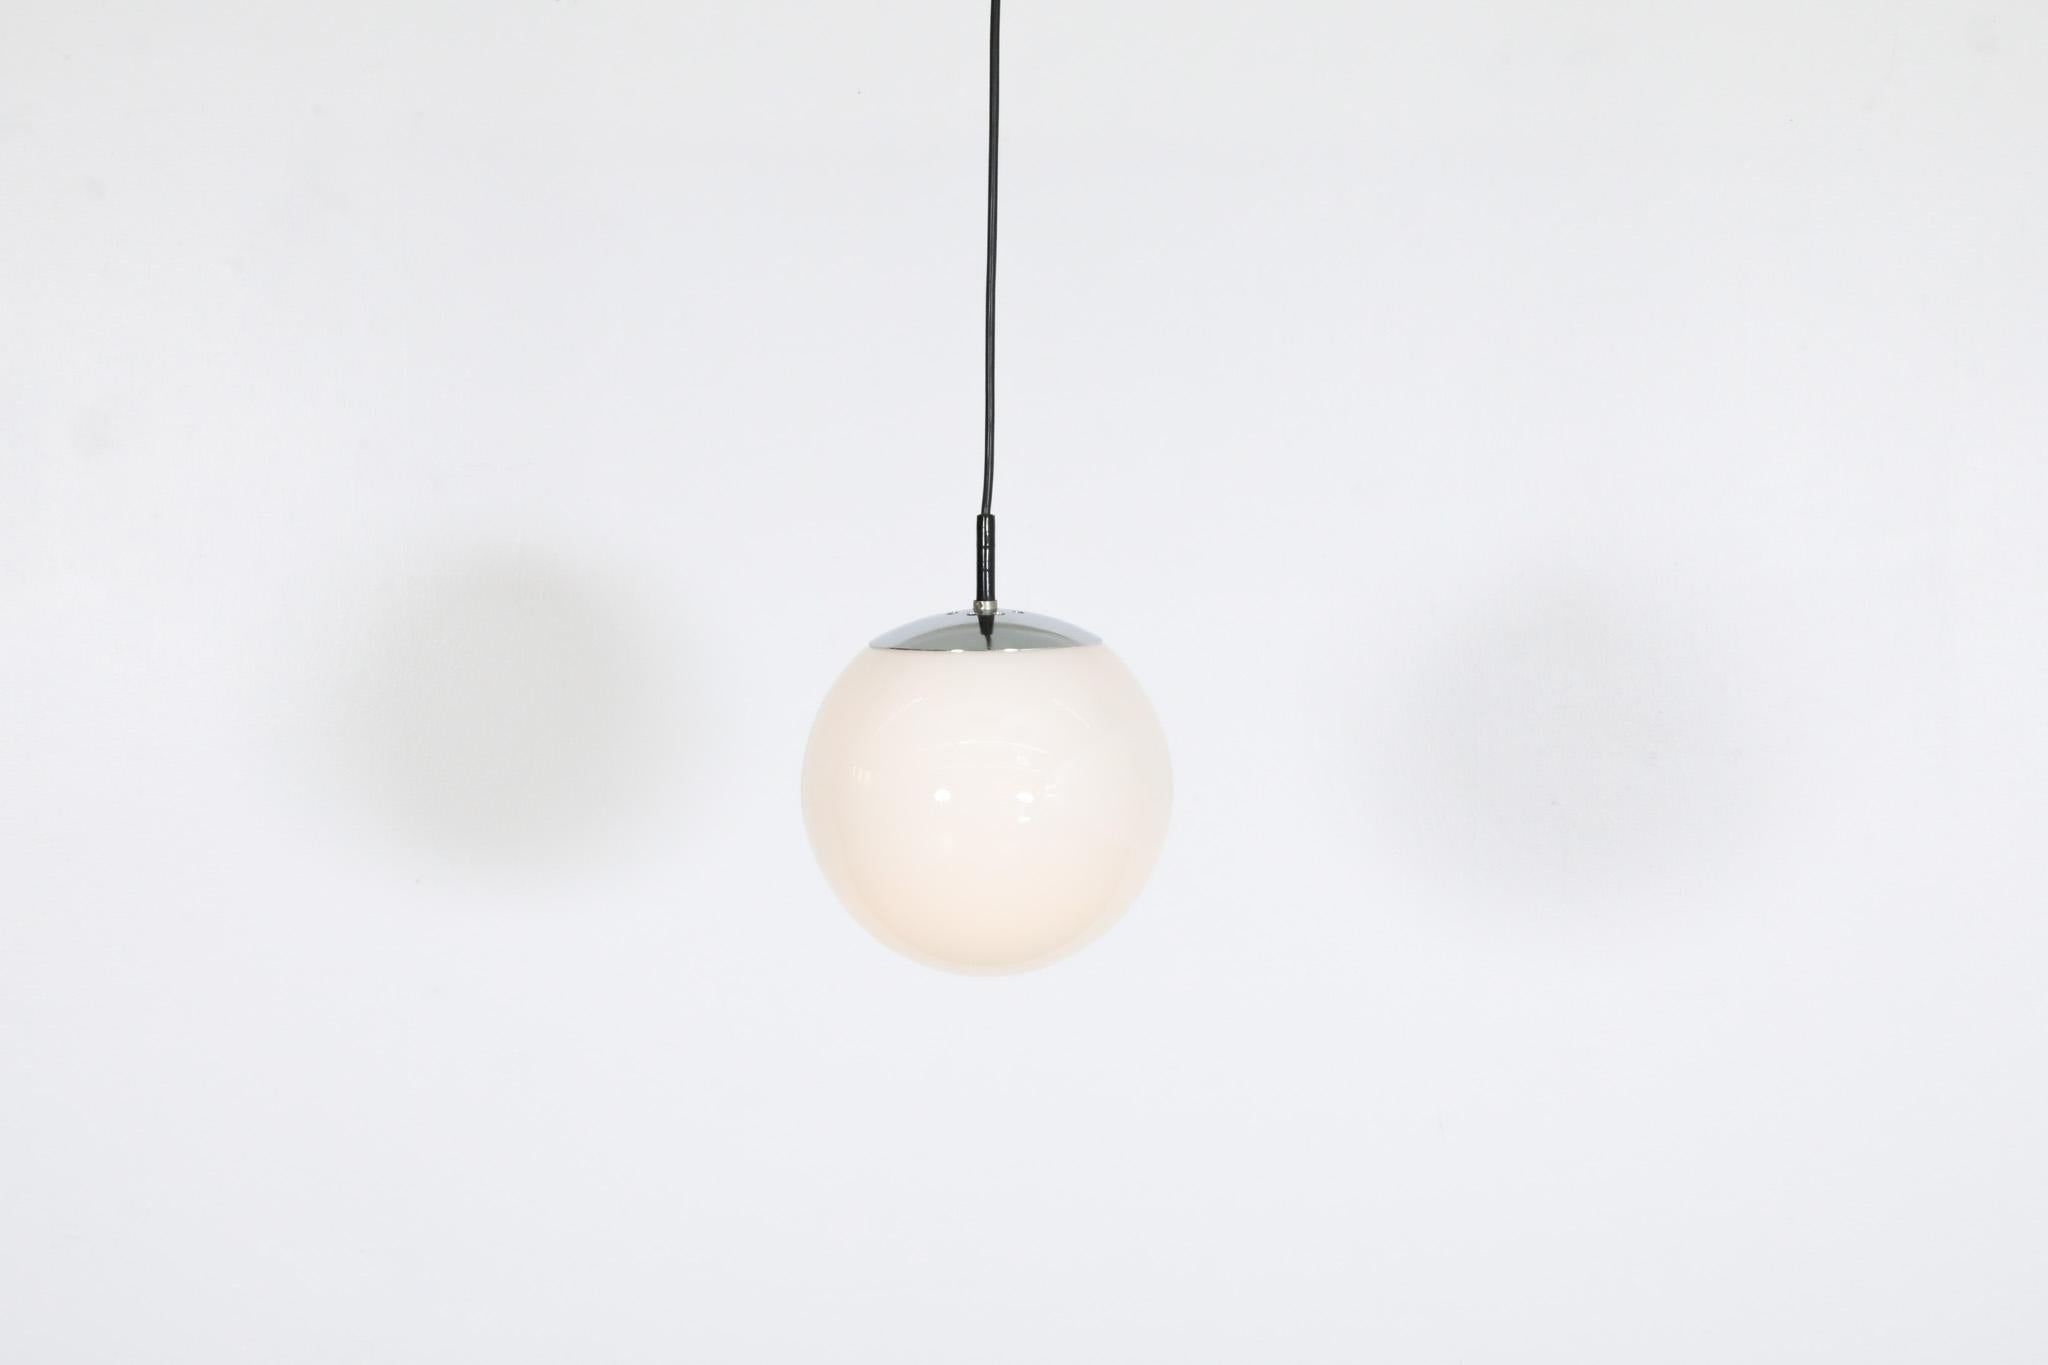 Attractive, Mid-Century, RAAK (attr) vintage opaline glass globe pendants with chrome hardware. Simple, classic but fantastic Dutch design. Globes are semi-transparent when looking up at them. In good original condition with visible wear consistent